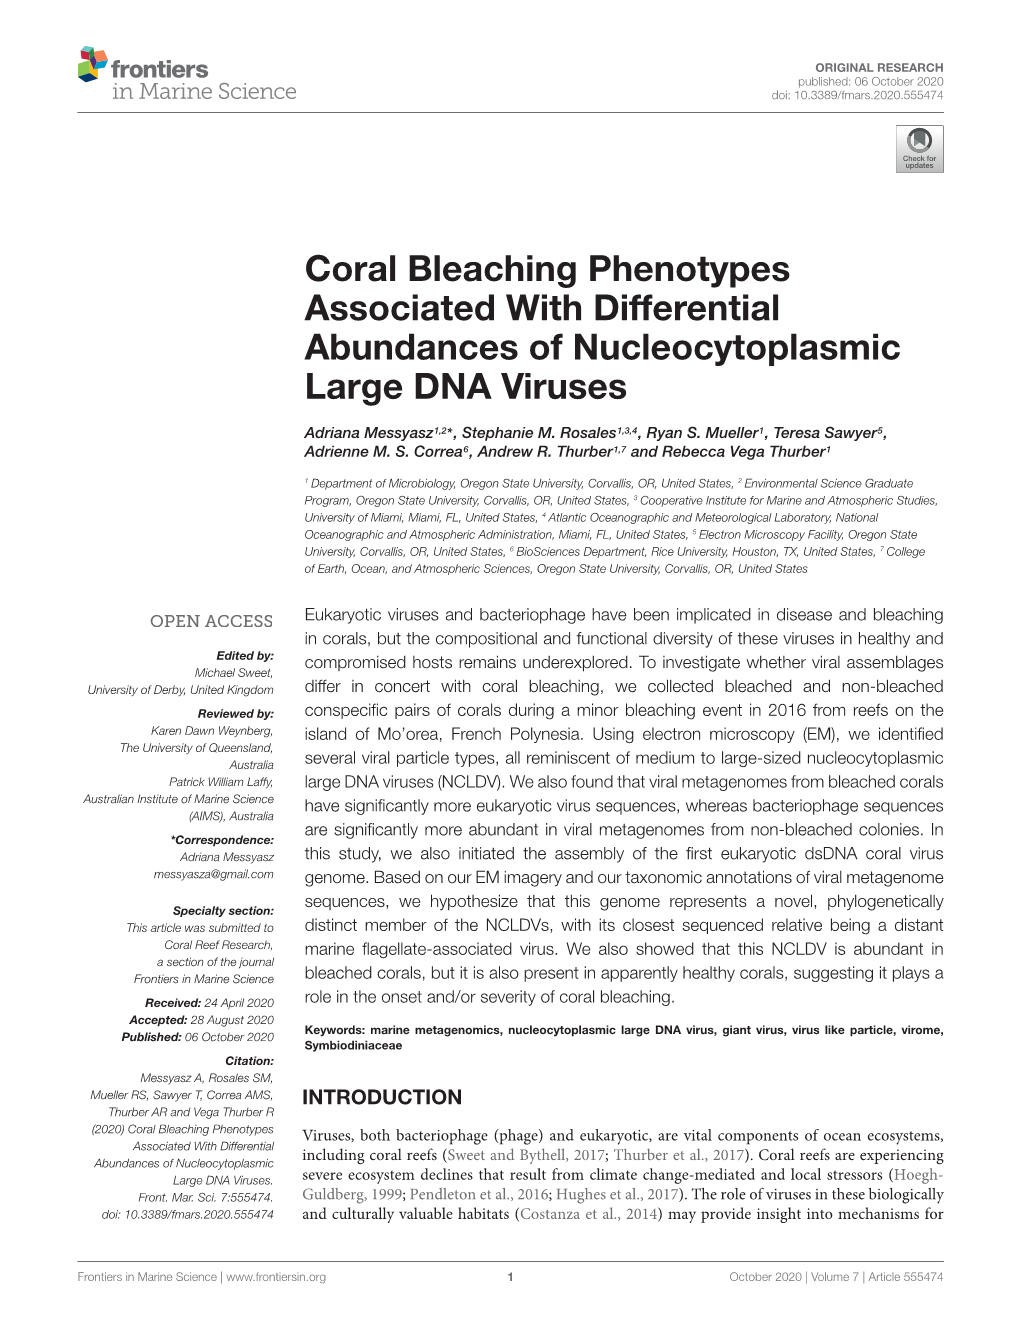 Coral Bleaching Phenotypes Associated with Differential Abundances of Nucleocytoplasmic Large DNA Viruses